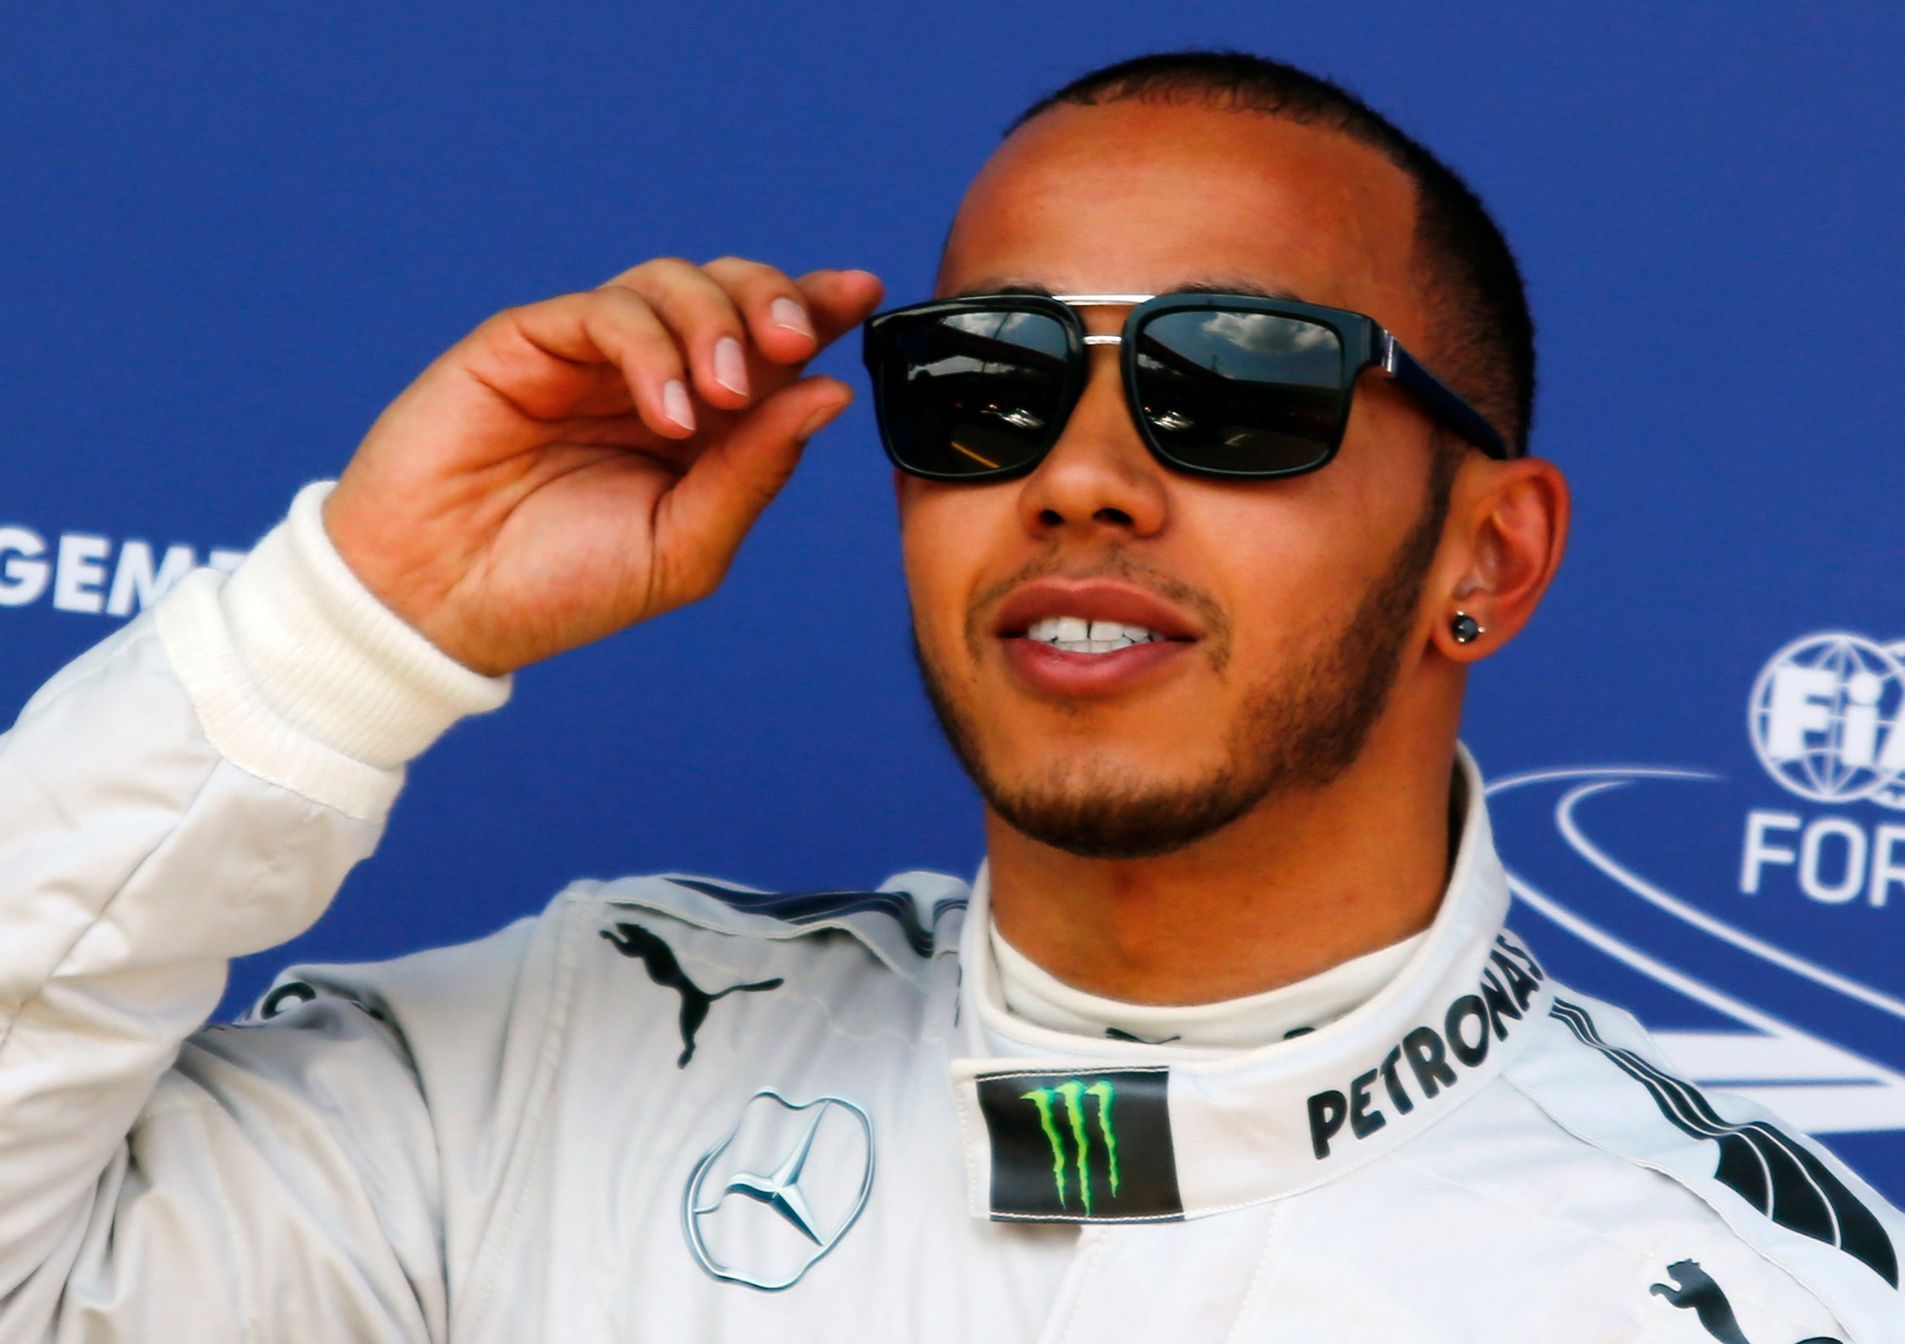 Mercedes Formula One driver Hamilton of Britain reacts after